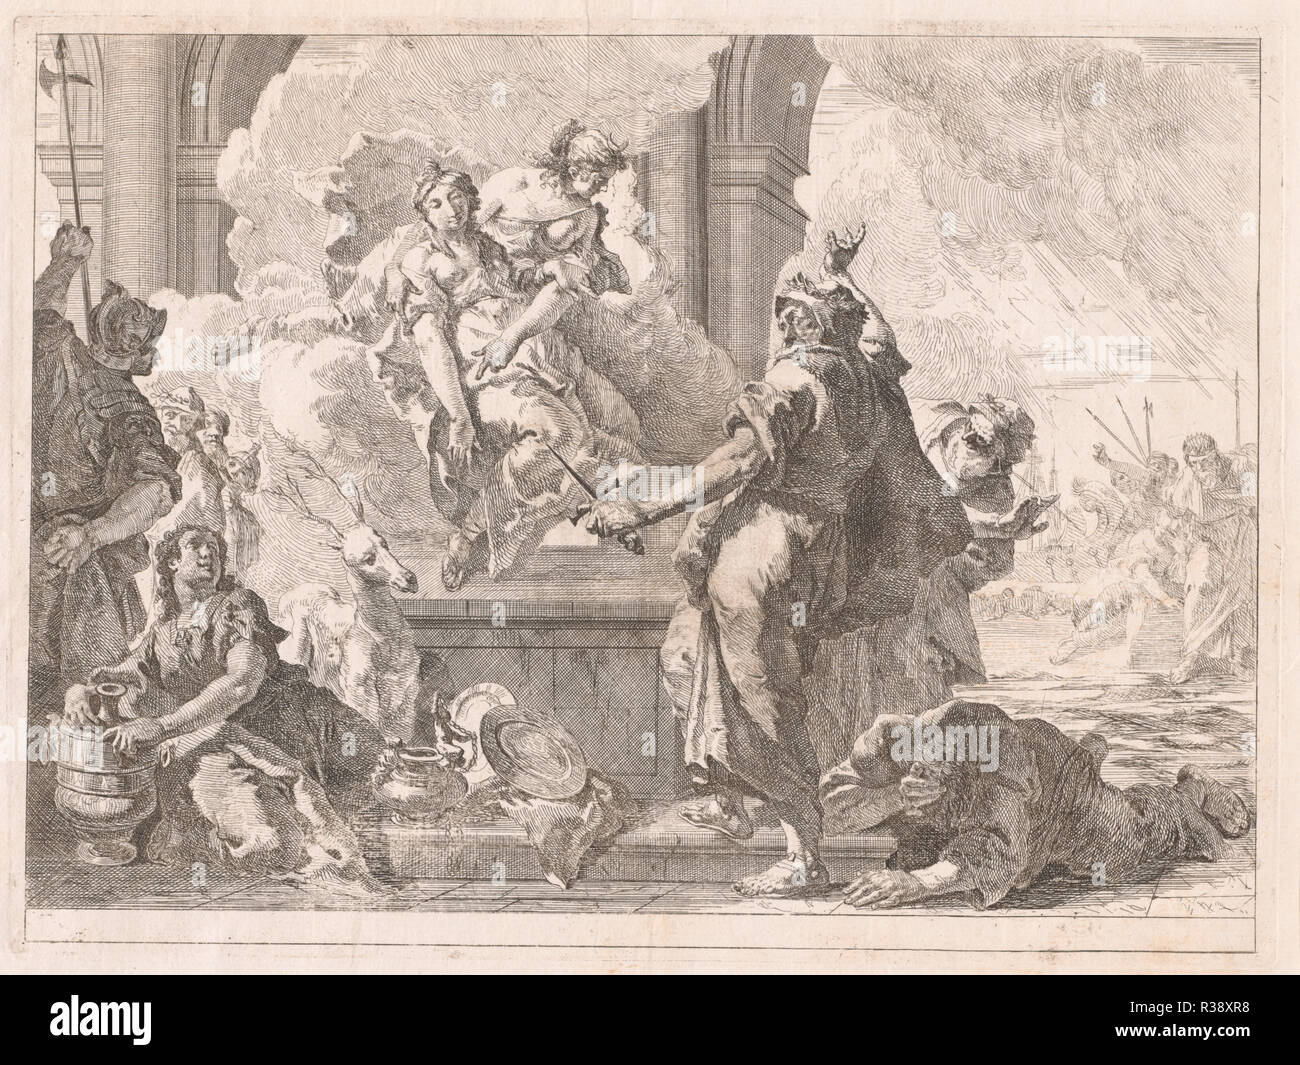 The Sacrifice of Iphigenia. Dated: 1744. Dimensions: plate: 28.7 × 38.7 cm (11 5/16 × 15 1/4 in.)  sheet: 41.3 × 59.2 cm (16 1/4 × 23 5/16 in.). Medium: etching on laid paper. Museum: National Gallery of Art, Washington DC. Author: Francesco Fontebasso. Stock Photo